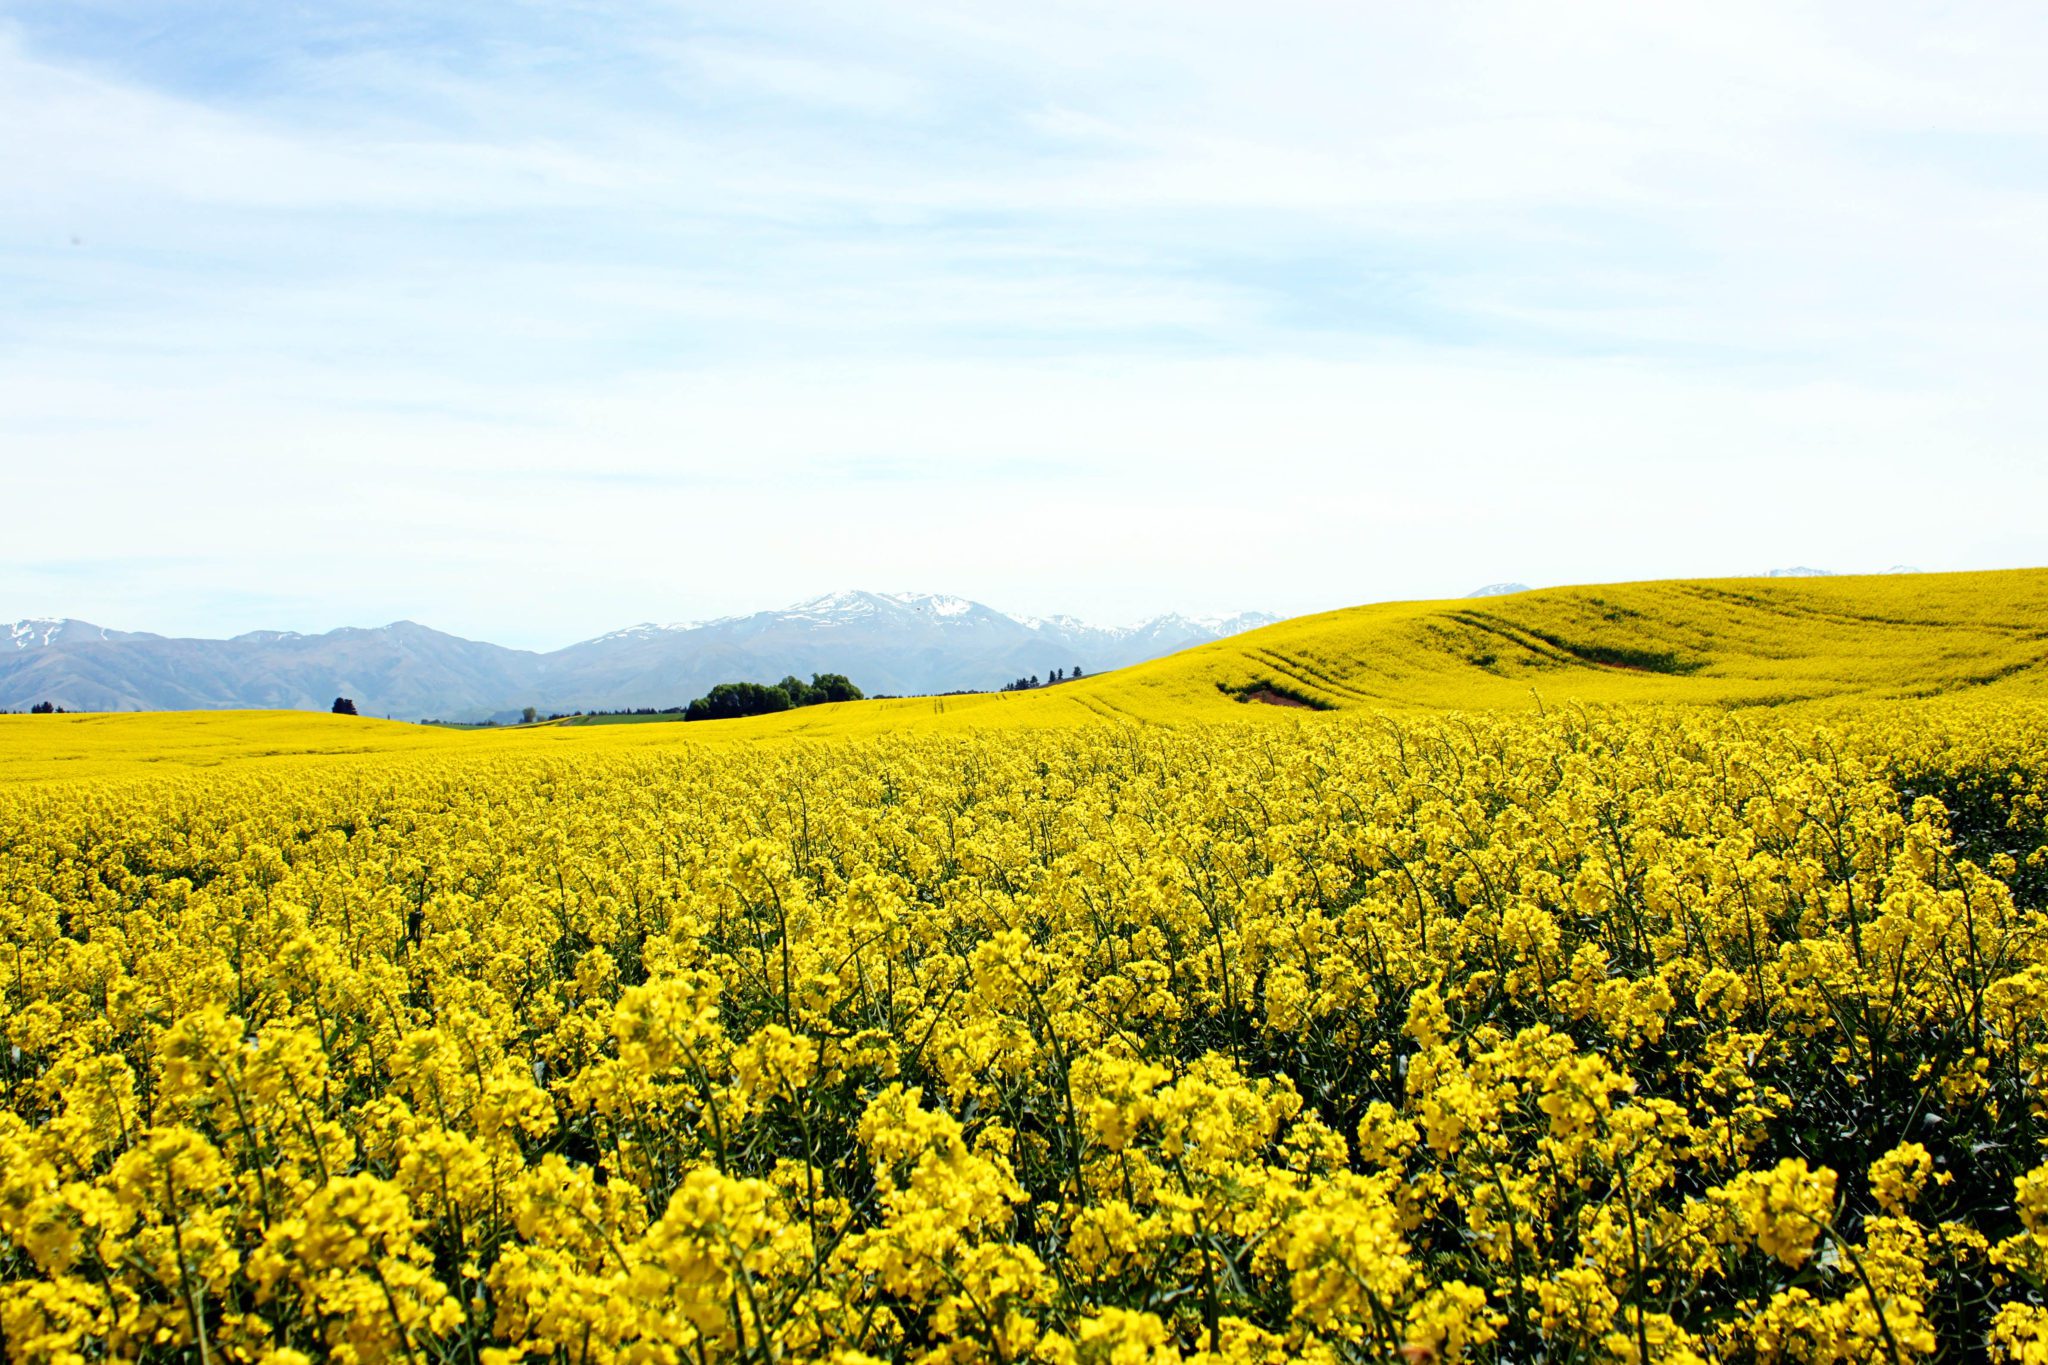 Where to go in New Zealand to find canola fields- Visit these 17 underrated spots on New Zealand's South Island- Where to go in New Zealand #newzealand #southisland #canolafields